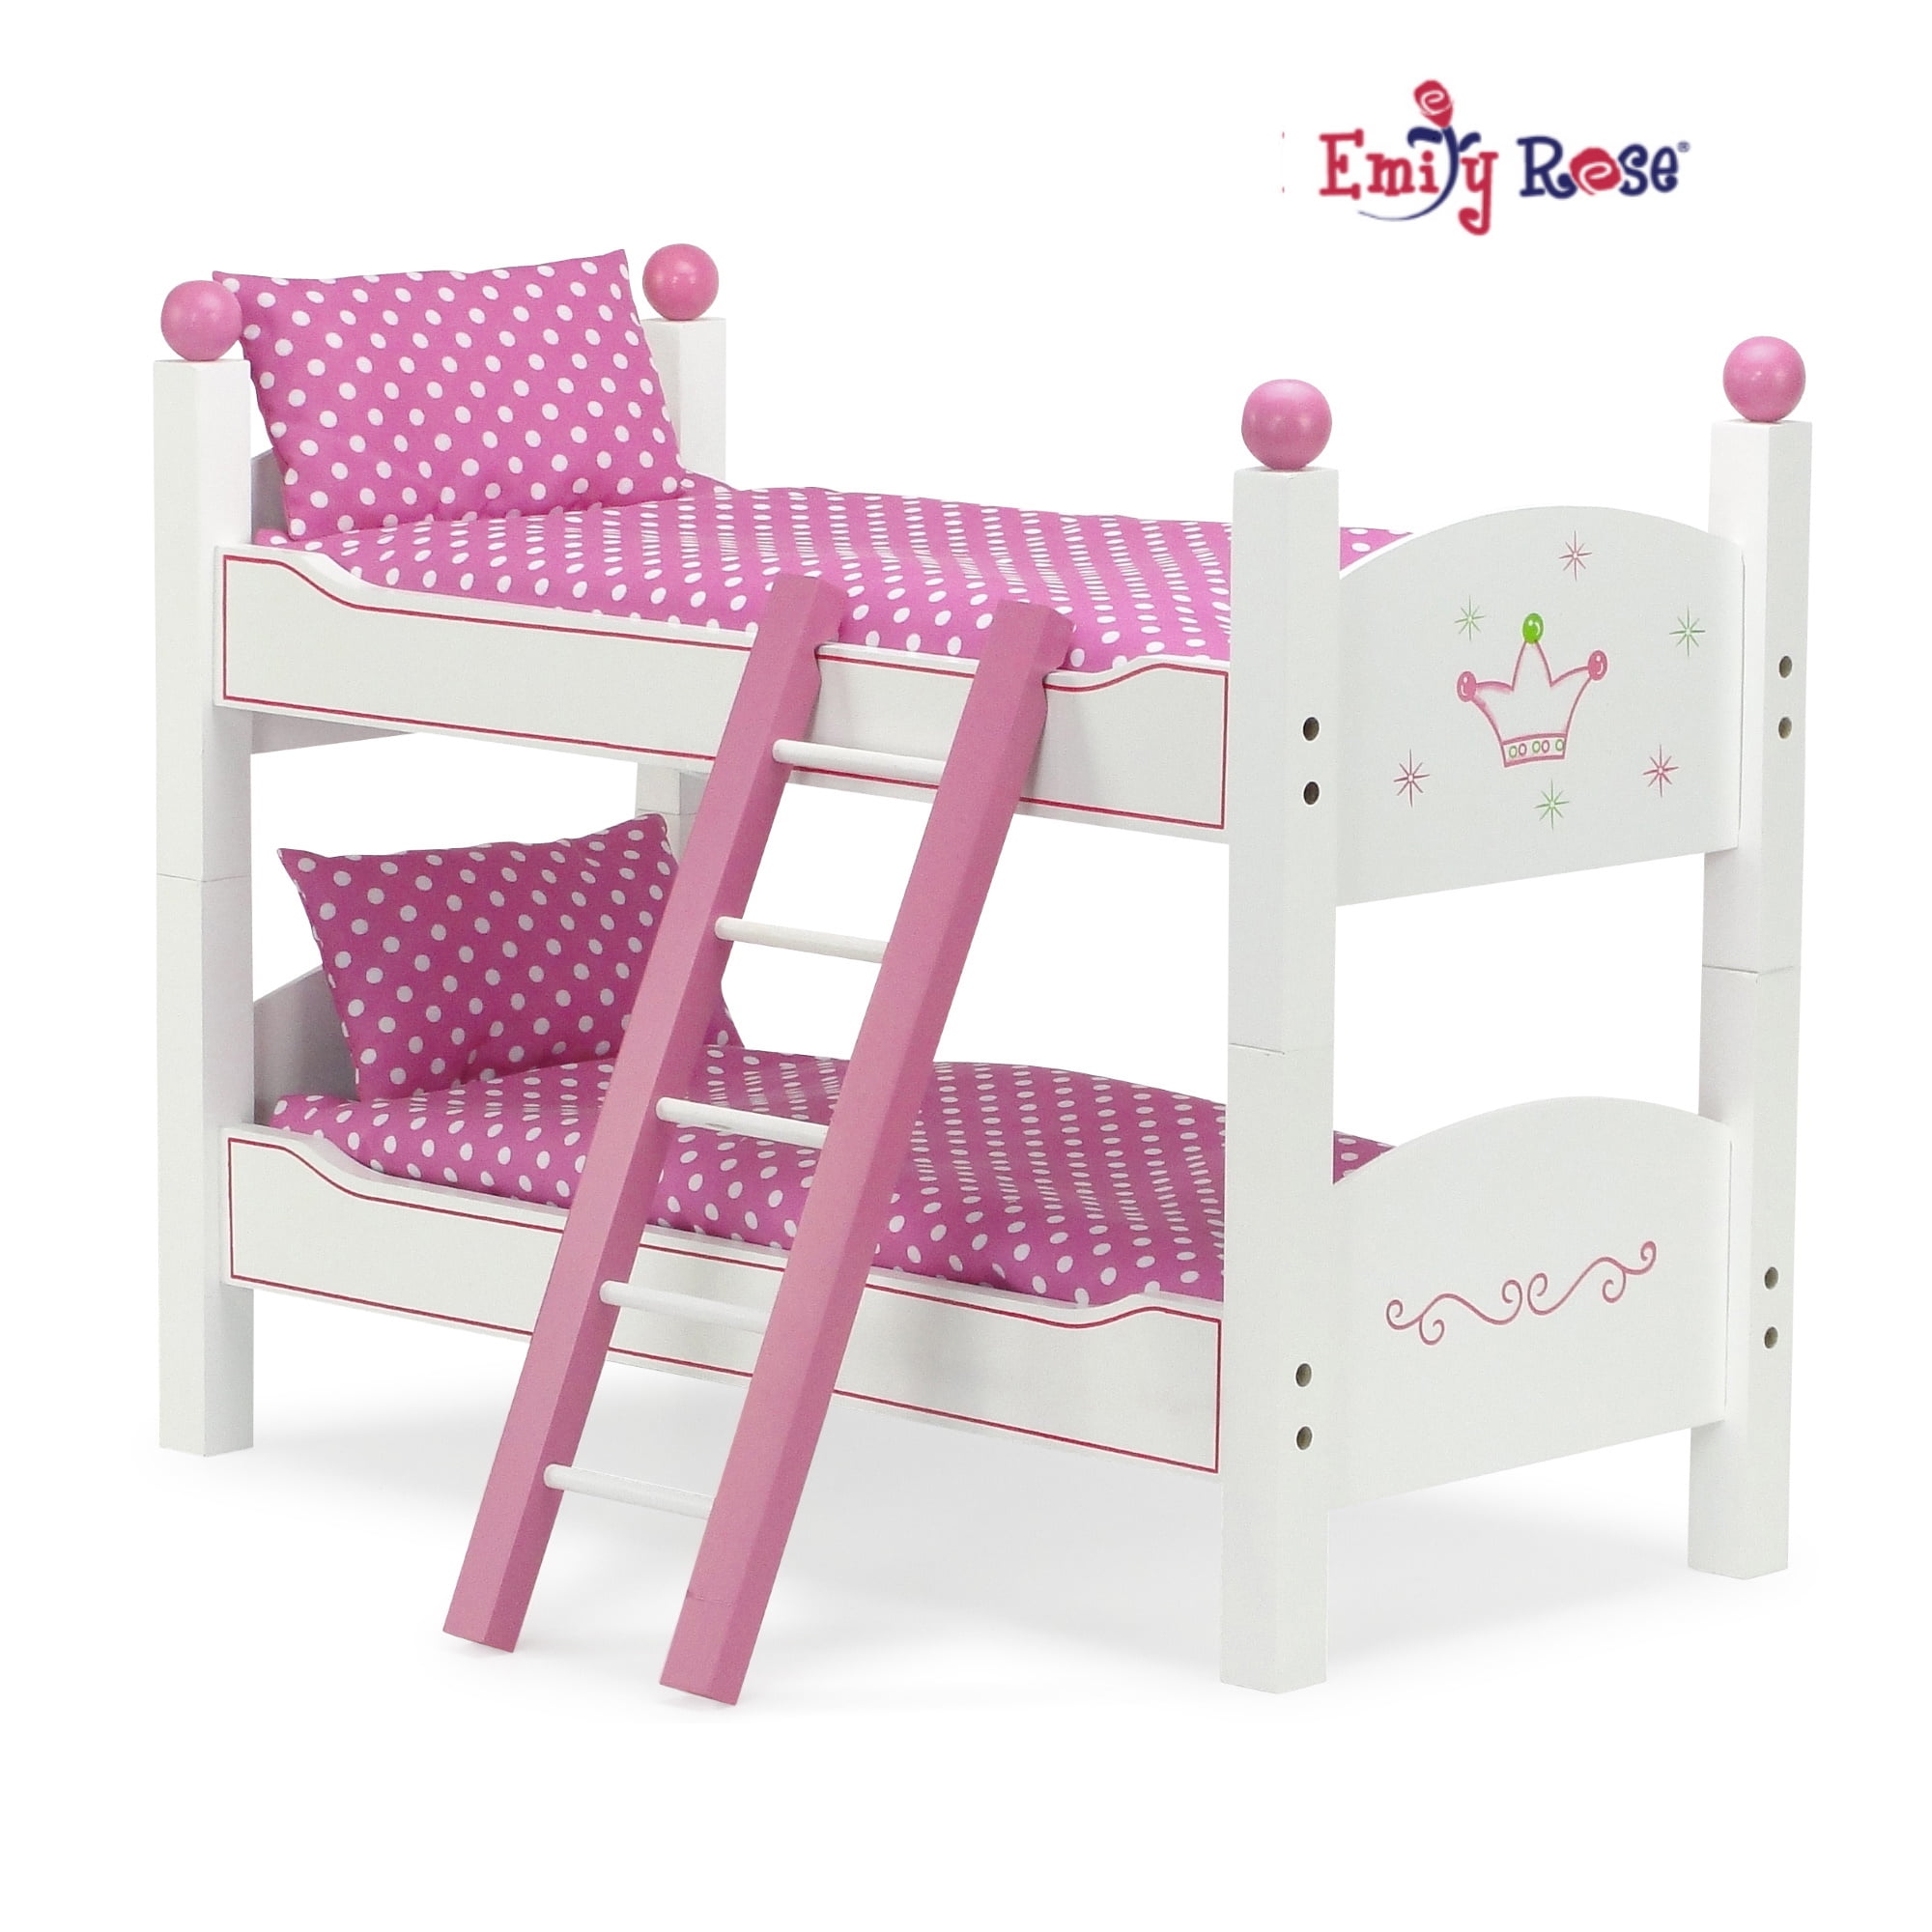 Emily Rose 18 Inch Doll Bunk Bed, How To Make American Doll Bunk Beds